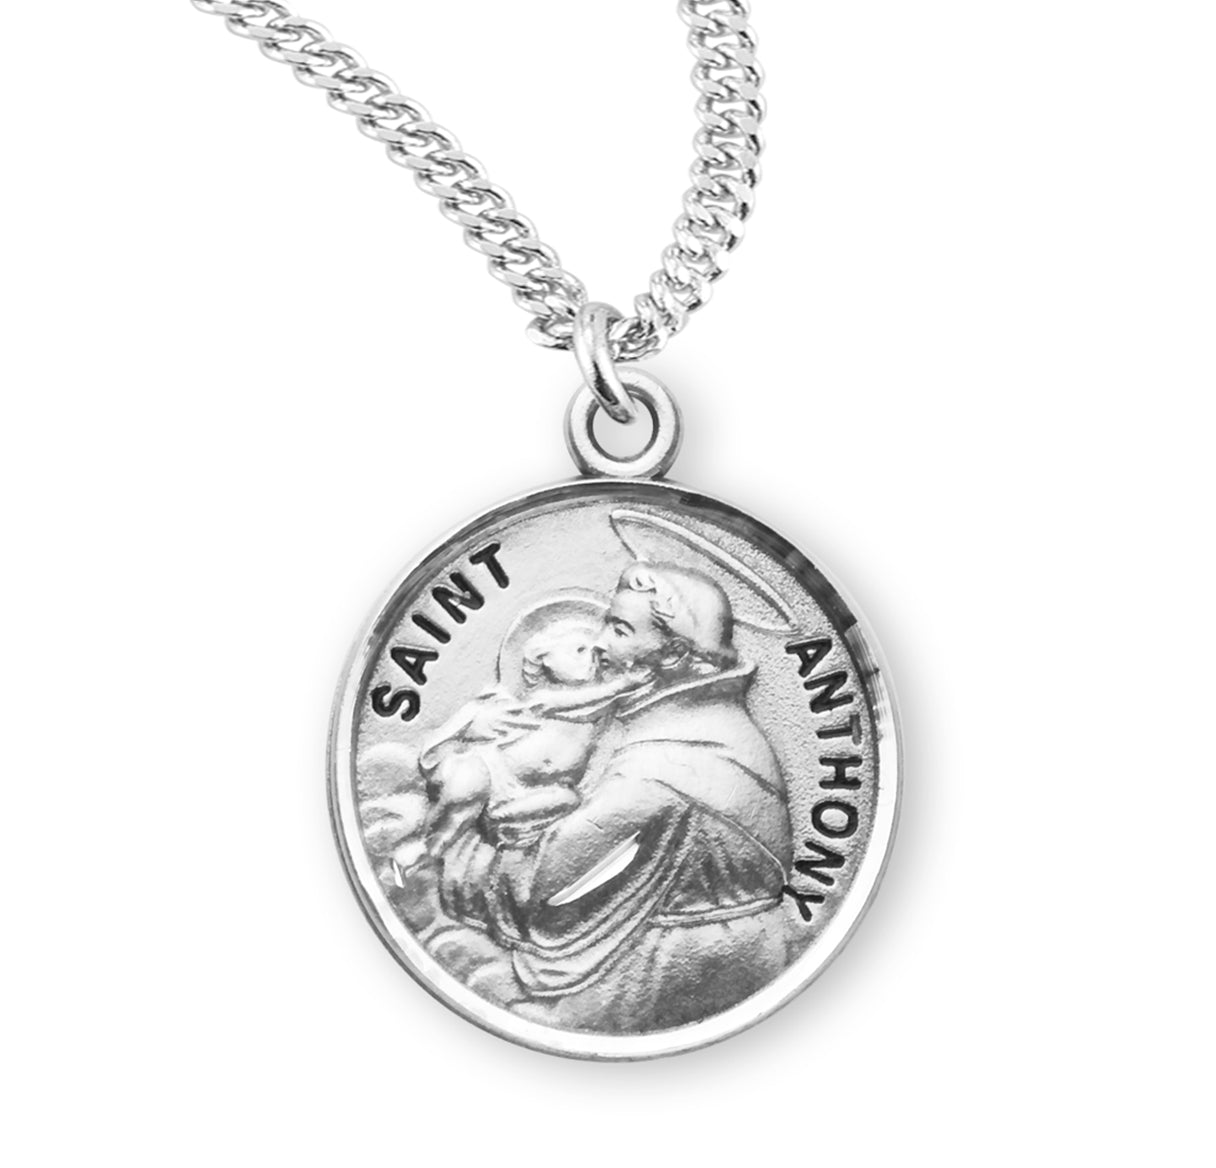 Patron Saint Anthony Round Sterling Silver Medal